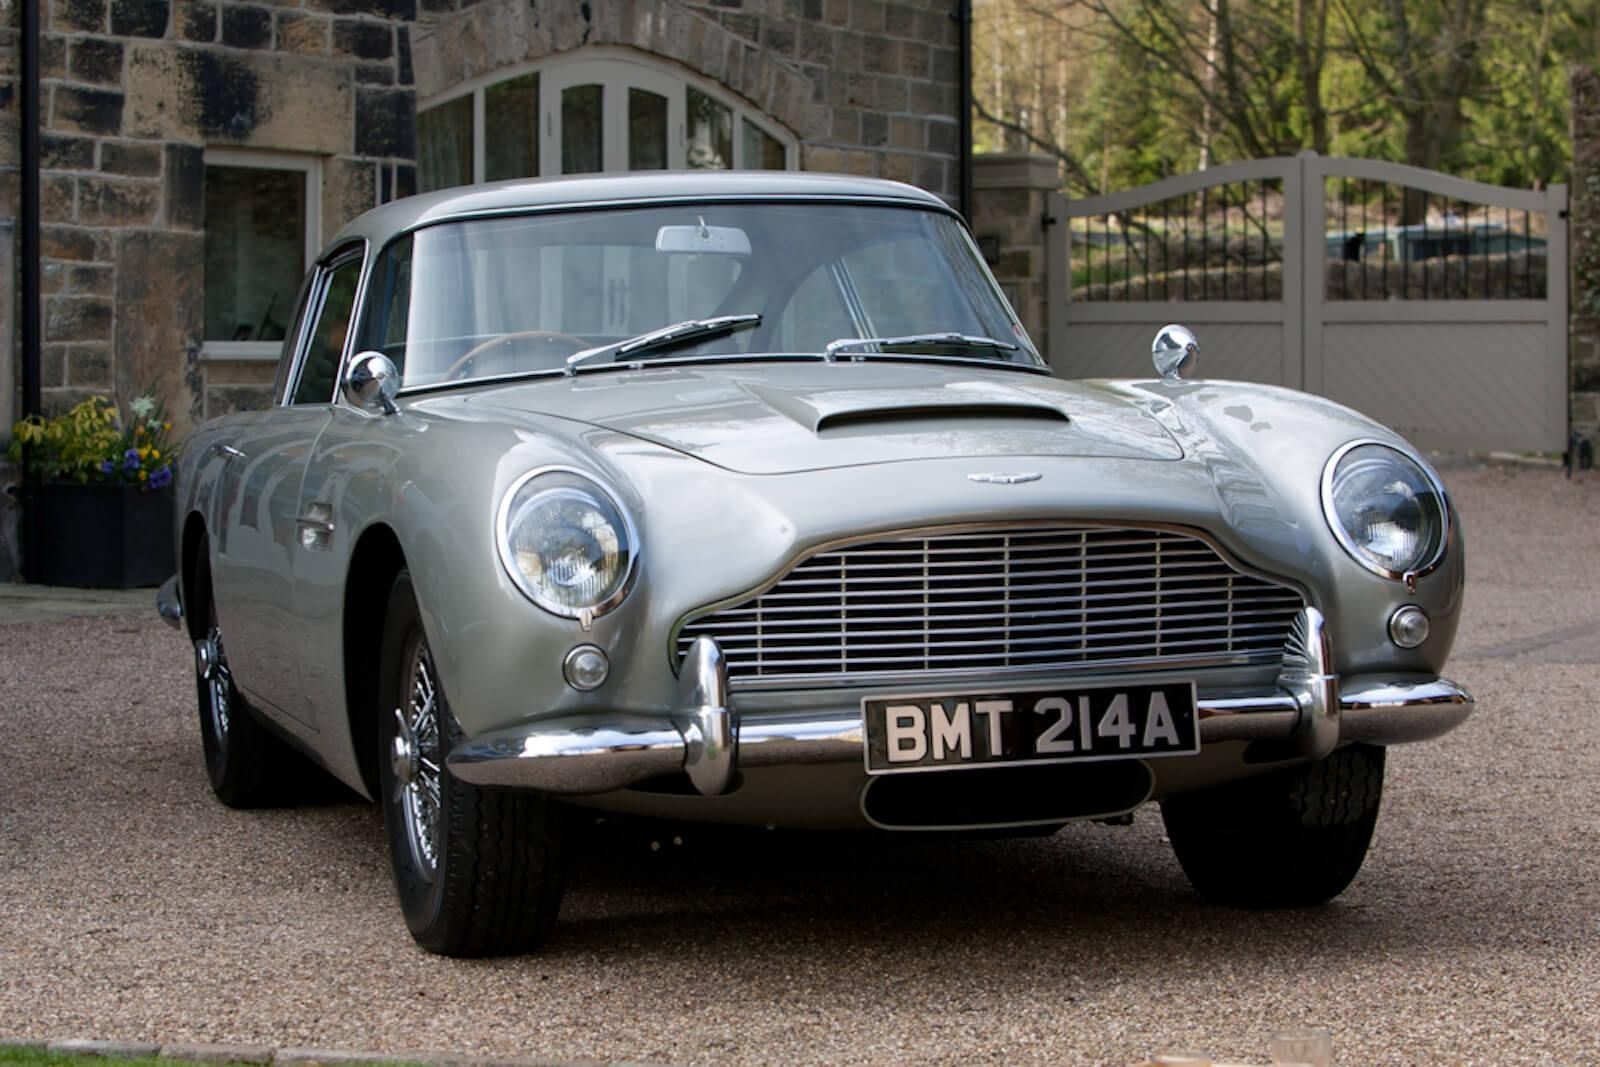 Silver DB5 parked in a courtyard